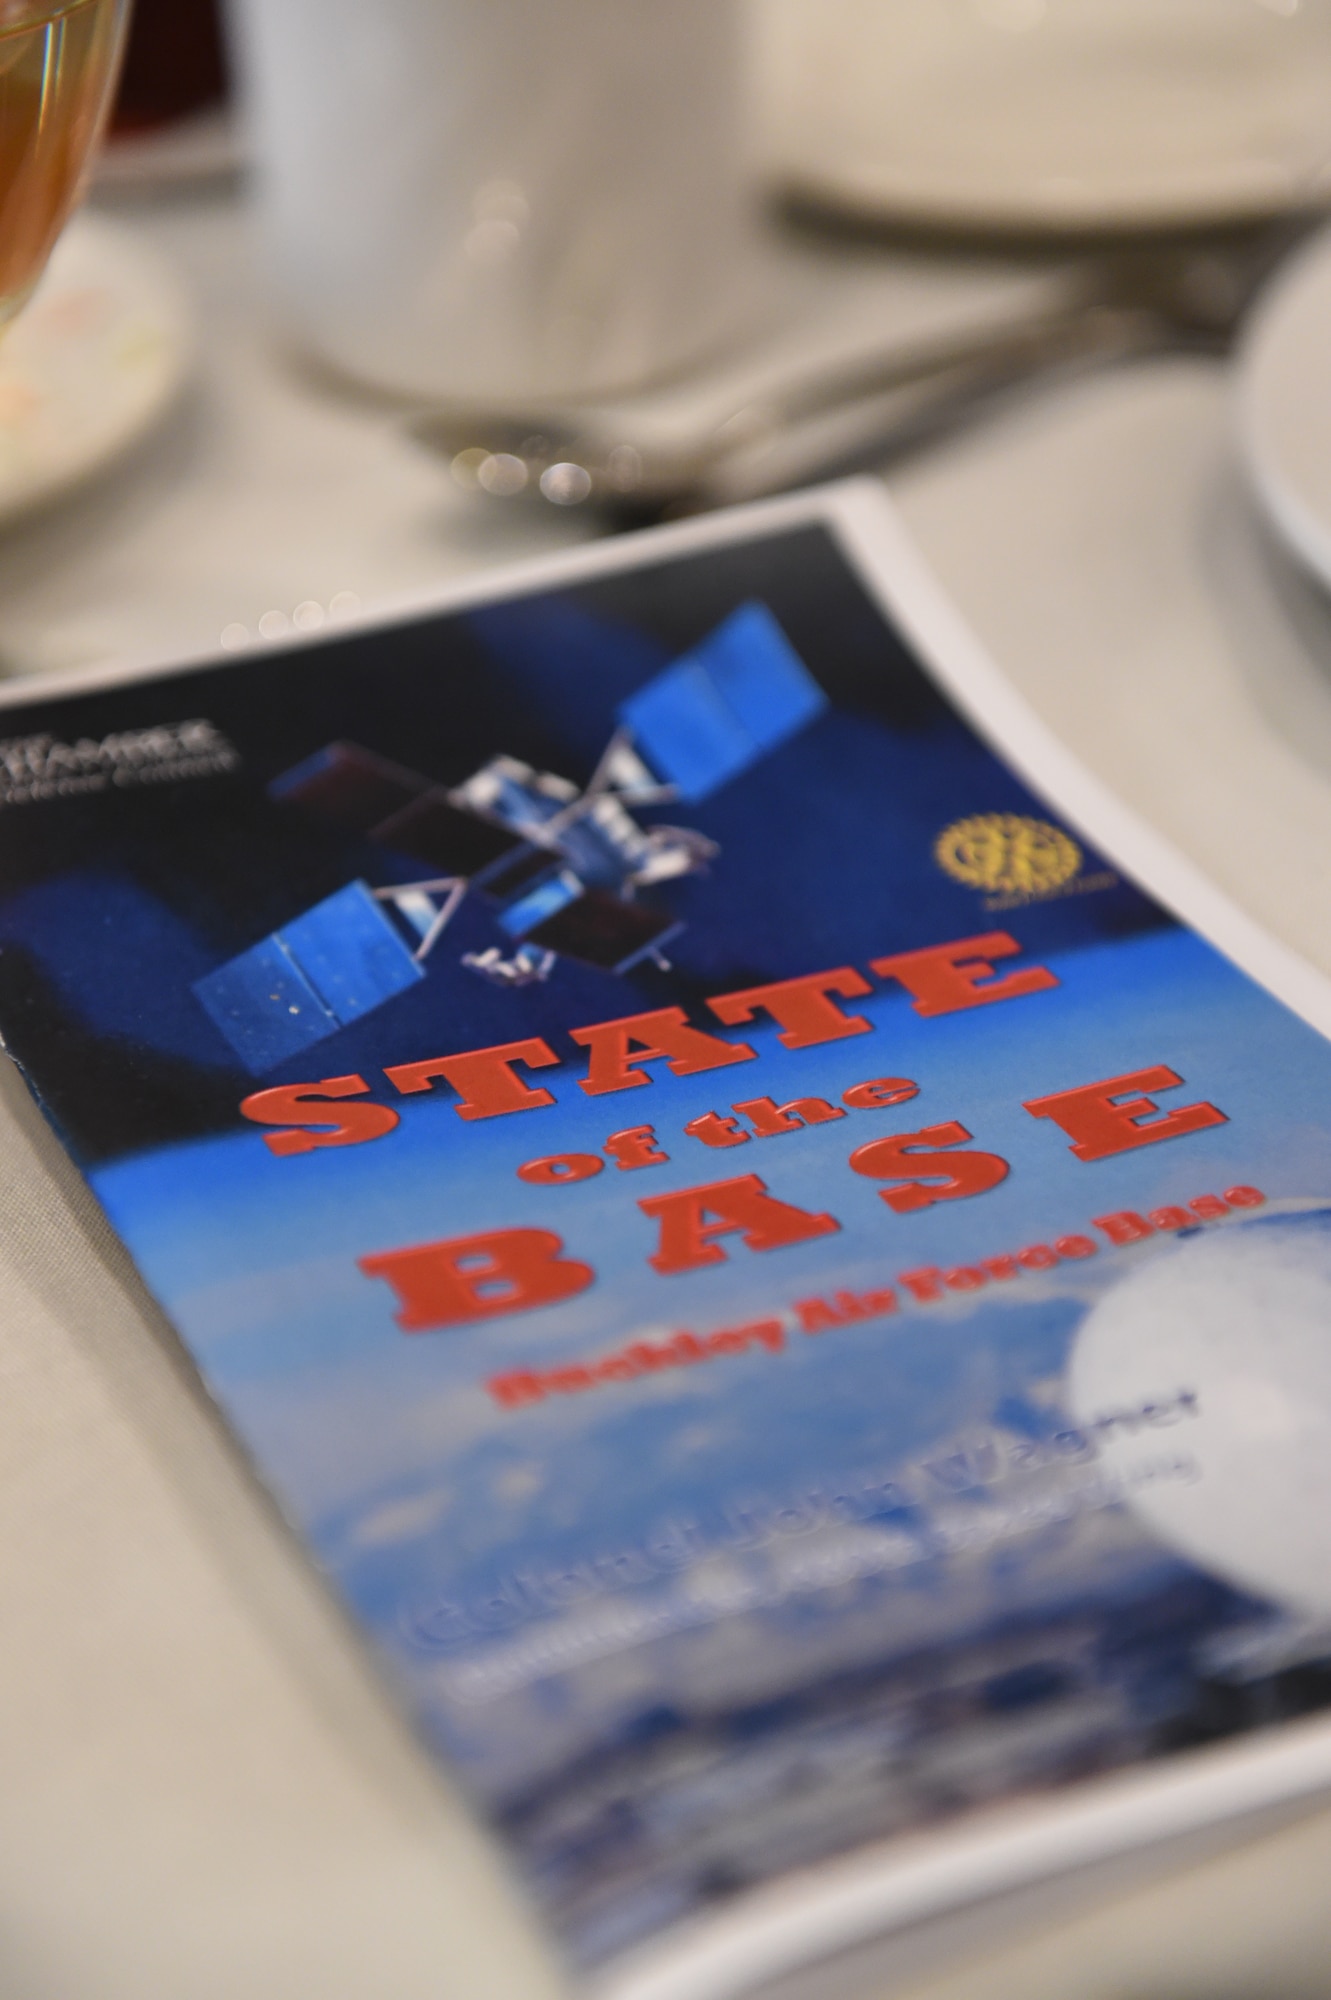 A State of the Base pamphlet is placed on a table during the State of the Base ceremony Jan. 21, 2015, at the DoubleTree by Hilton in Aurora, Colo. During the speech, Col. John Wagner, 460th Space Wing commander, discussed the base’s mission and current and upcoming events for Team Buckley, along with the base’s economic impact on the community, Aurora Rotary and Aurora Chamber of Commerce. (U.S. Air Force photo by Airman 1st Class Samantha Saulsbury/Released)